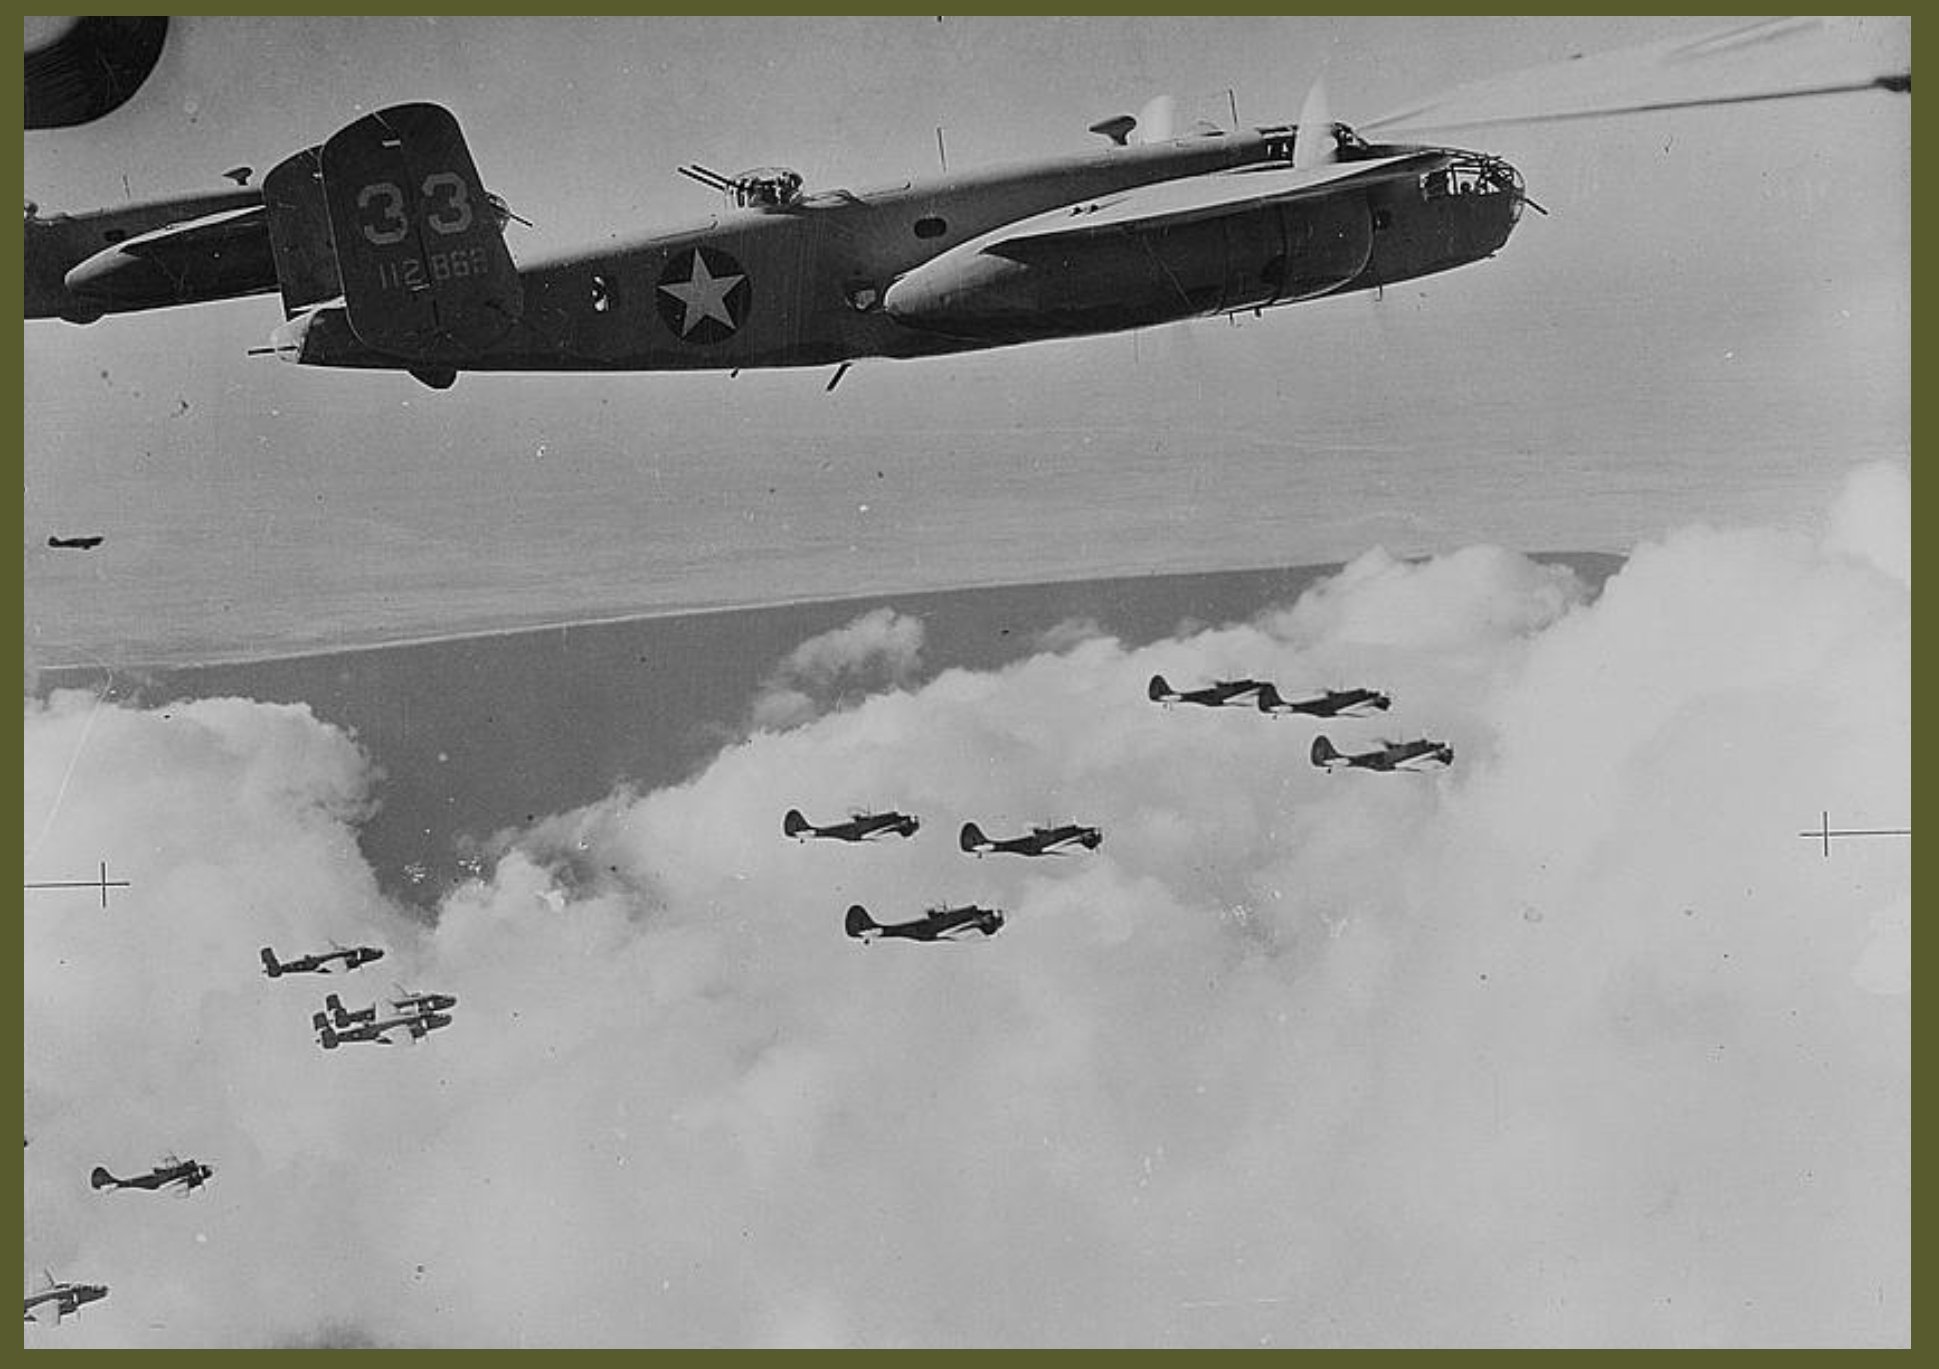 Mitchell B026 bombers of the United States Army Air Forces and Baltimore bombers of the South African air forces flying together in formation on their way to attack Rommels position in North Africa